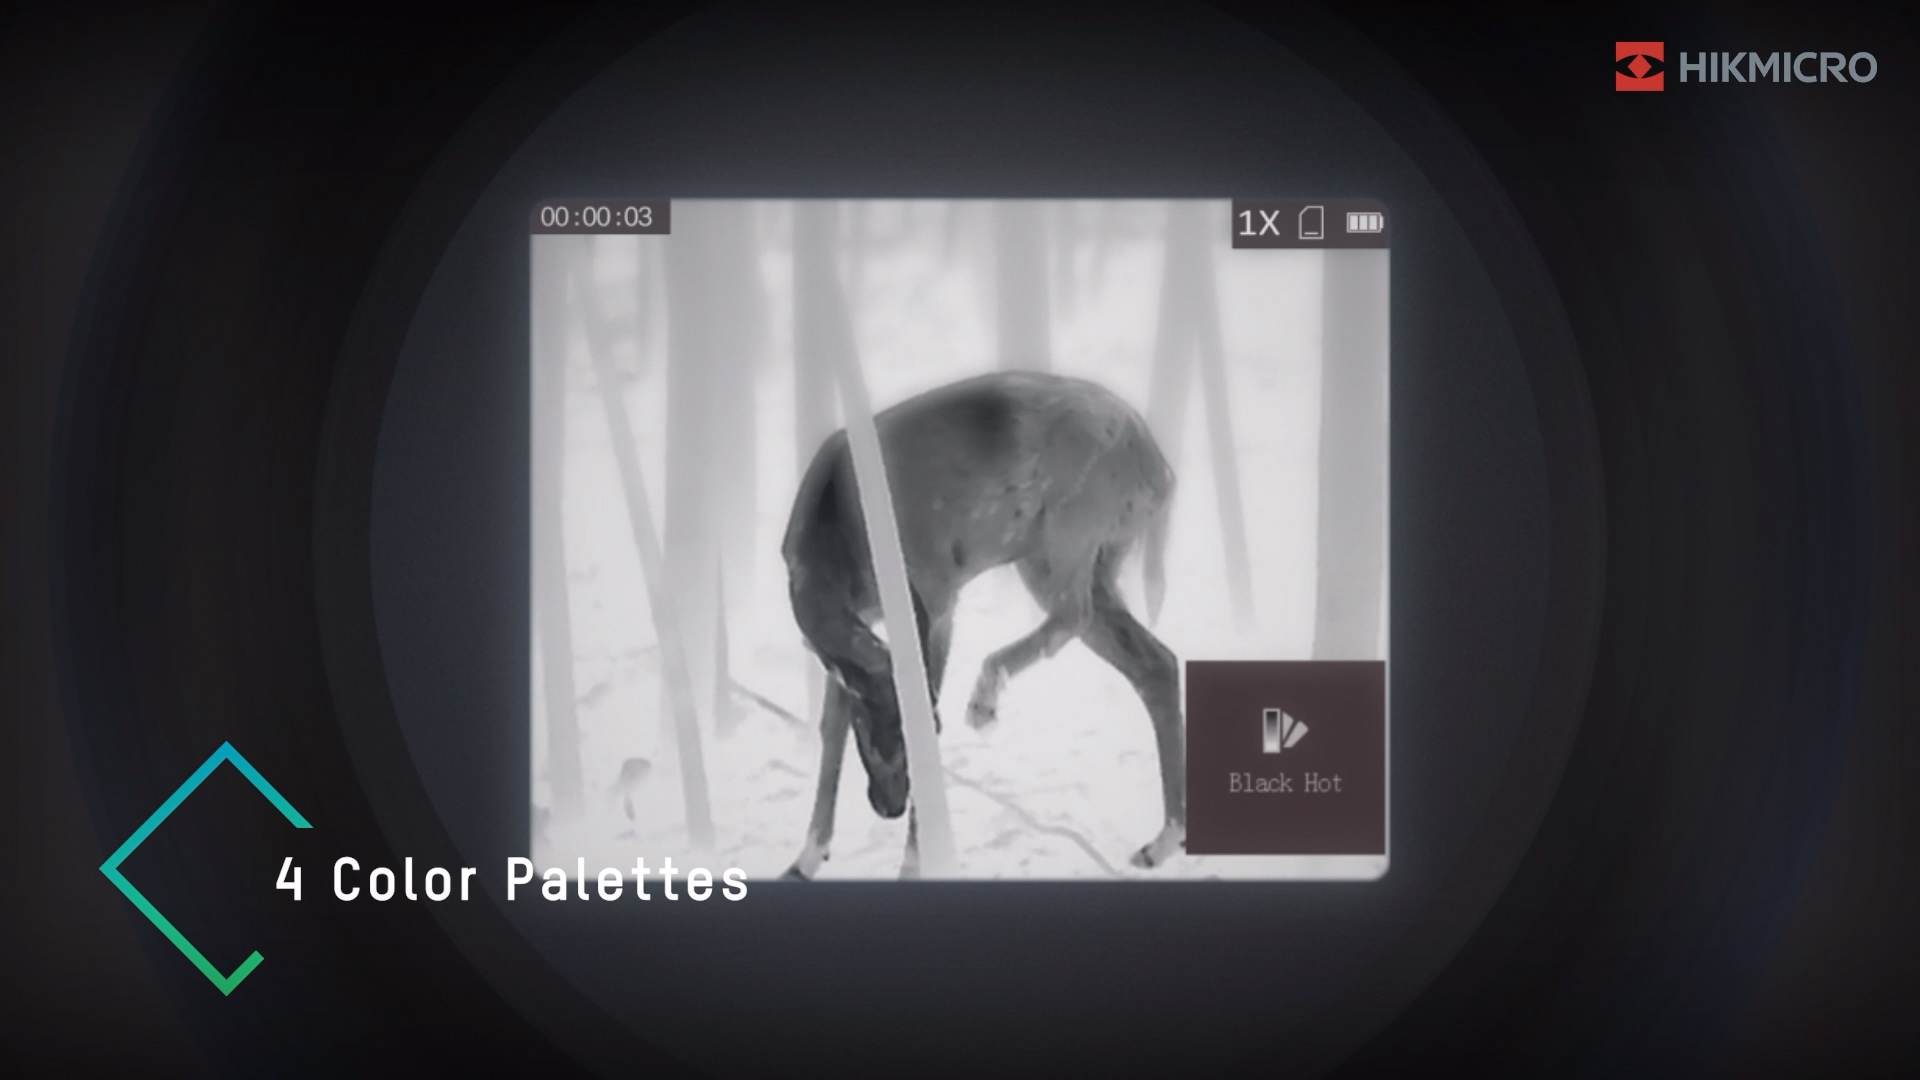 One of the four Hikmicro Lynx Pro LE10 Thermal Imaging Monoculars colour palettes is highlighted in this image, the image shows a deer in a 'hot black' palette mode.